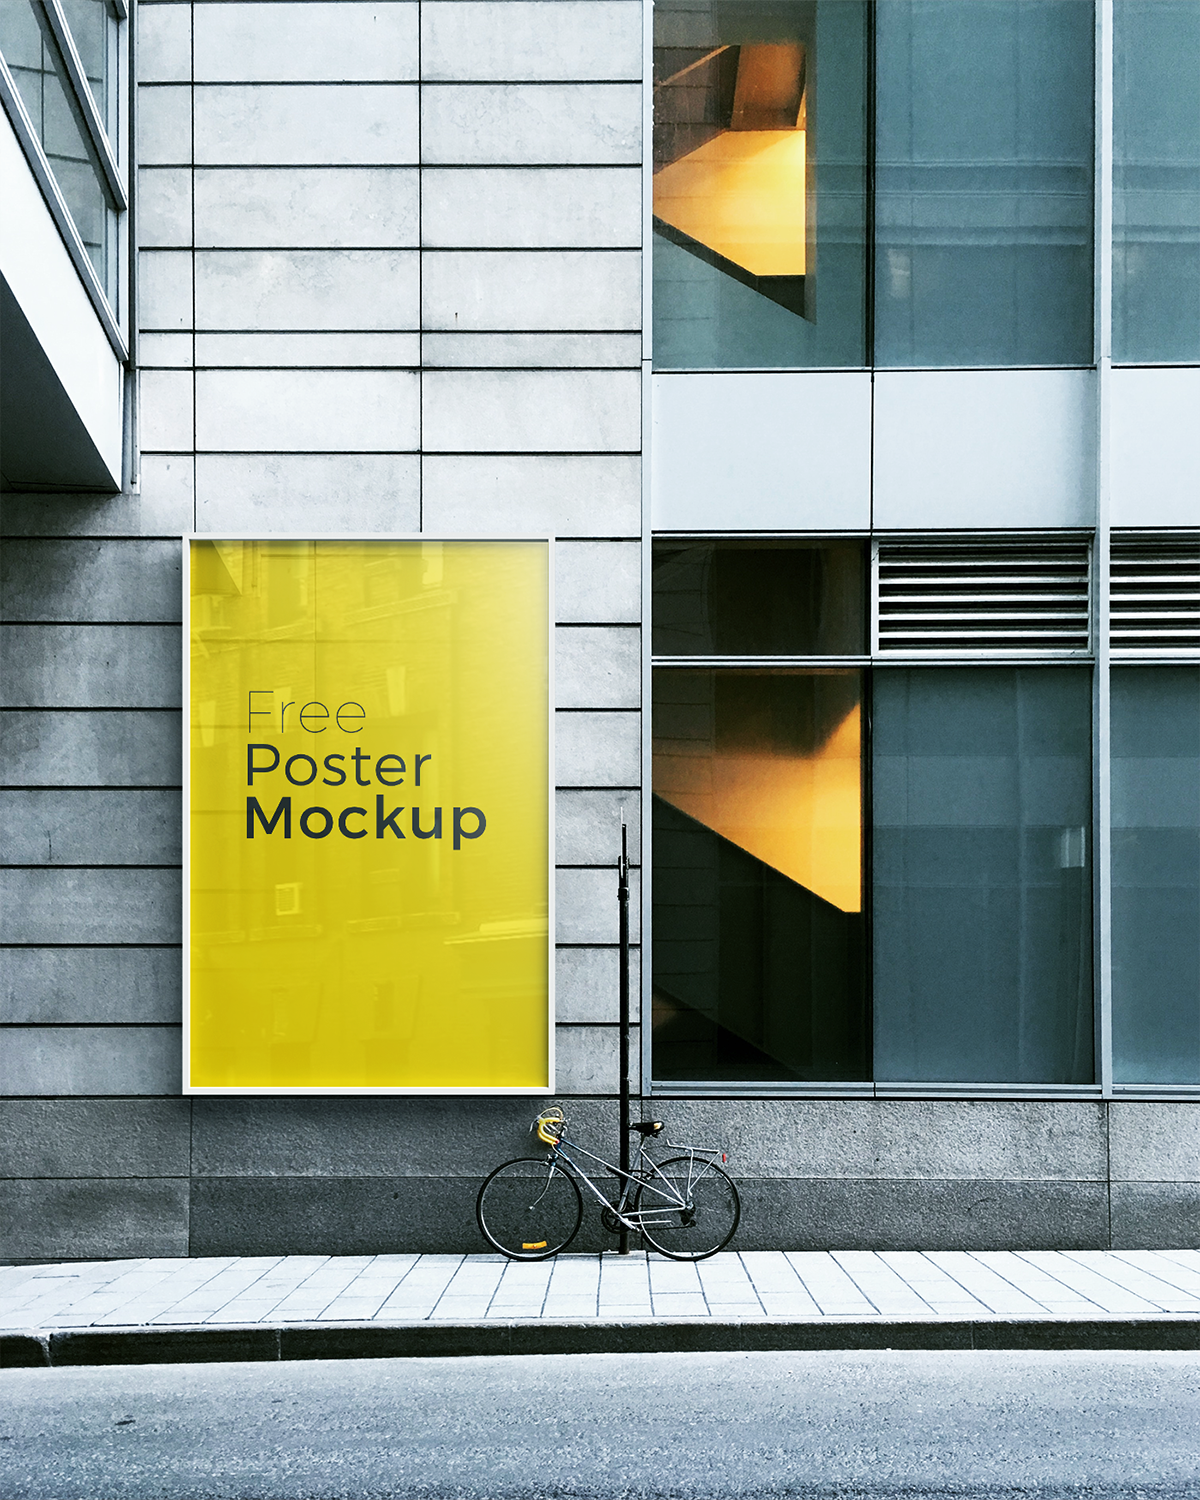 Download Free Poster And Billboard Mockups on Behance